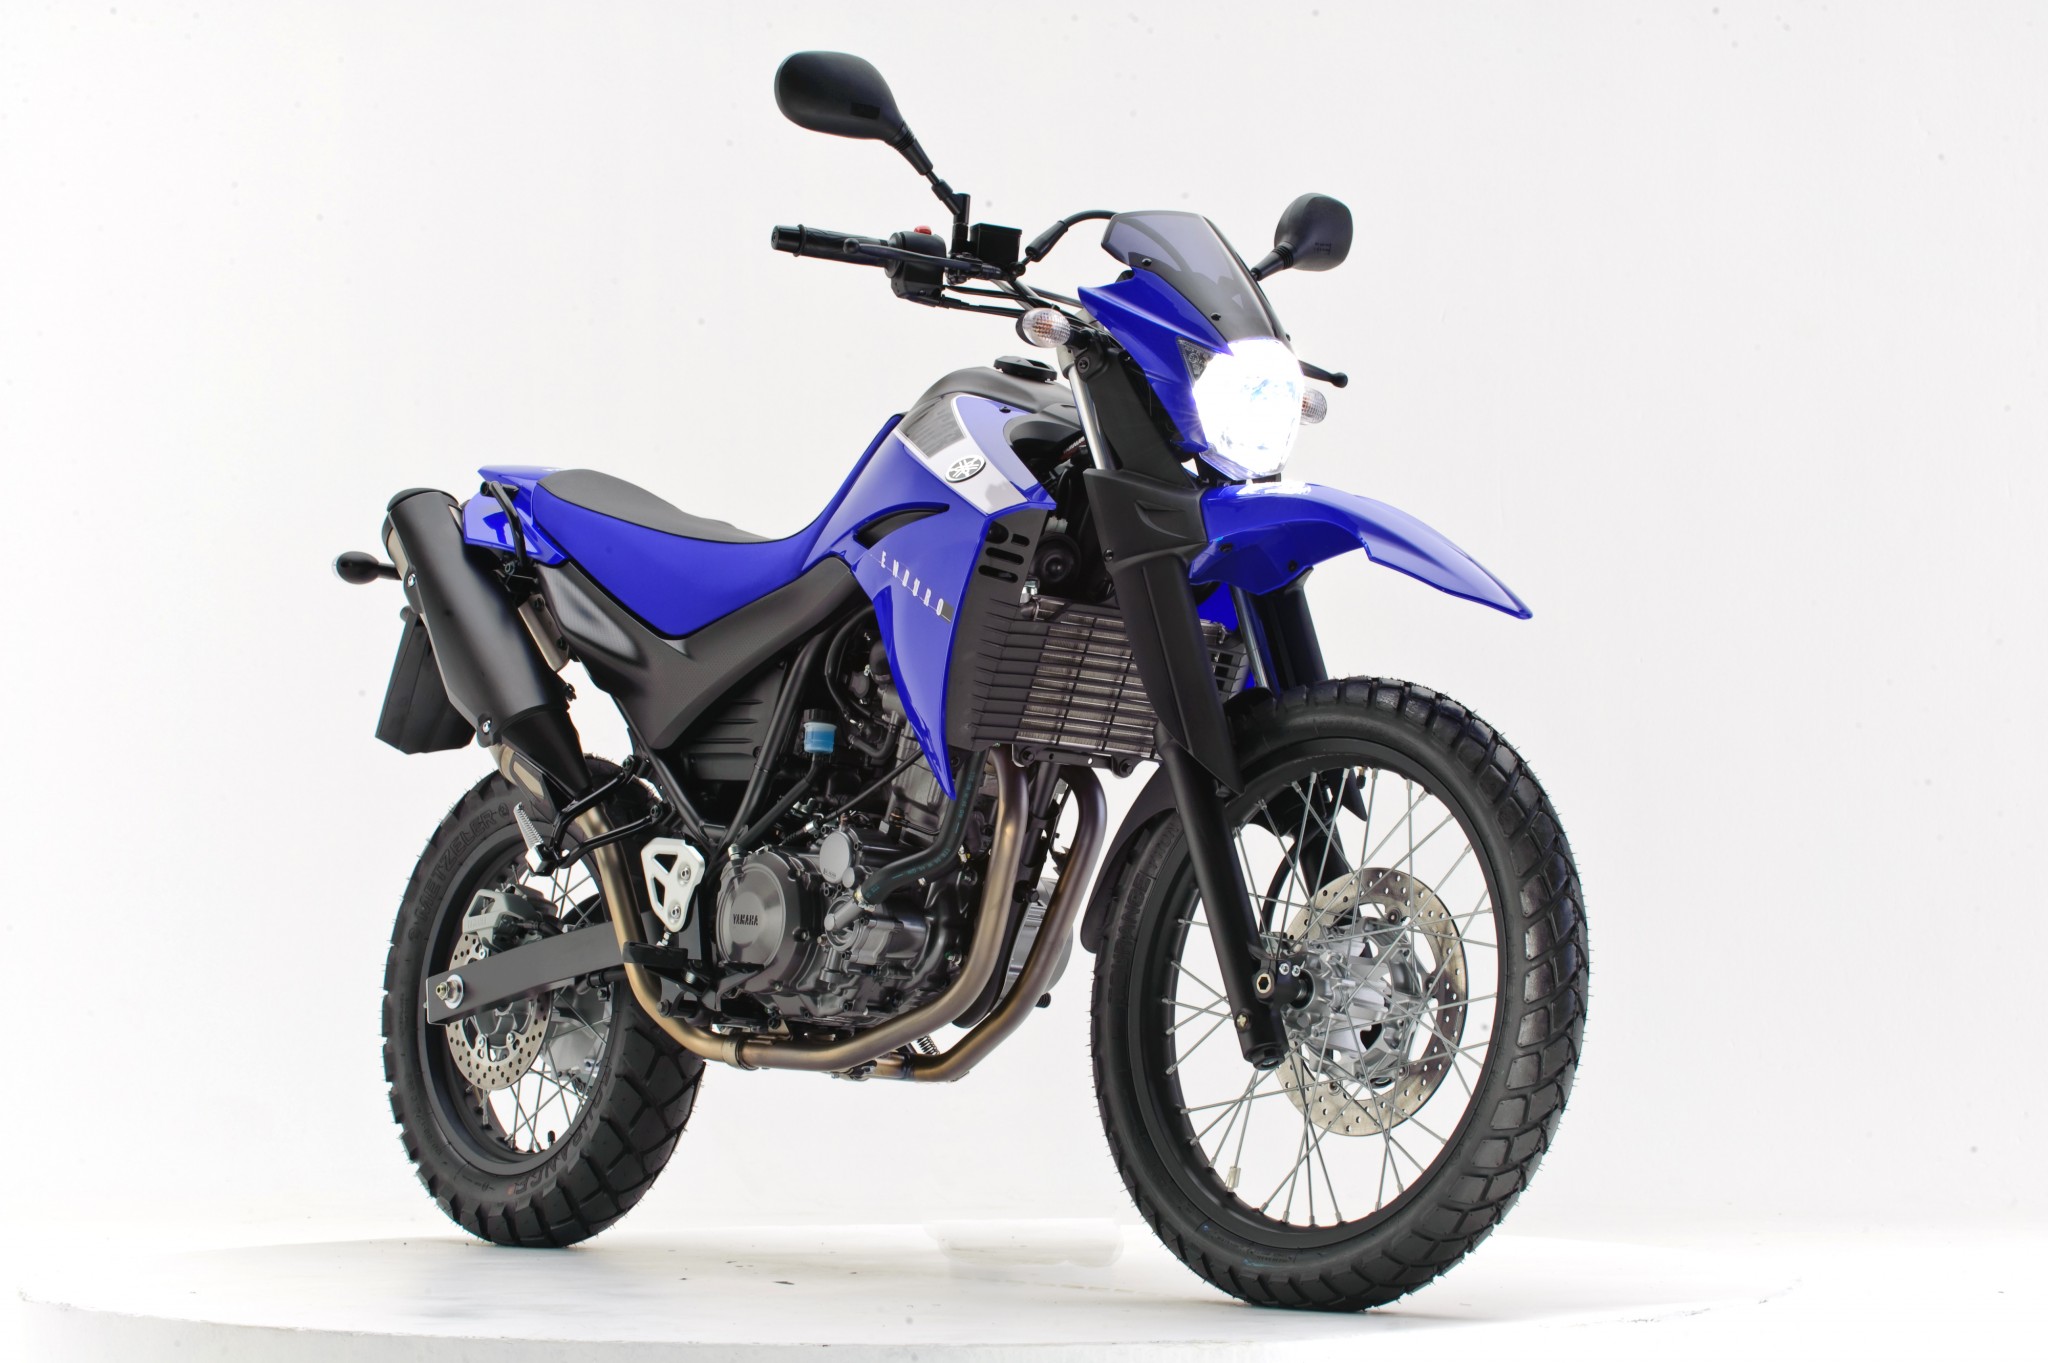 Yamaha XT660R 2012 Azul Iso You'll discover it's superior customer service, wonderful promotions for players new and old, and a great deal of action around the clock to keep you equipment.  This 's why it's important to keep a watch out for bets in advance.  This 's normally where the brighter money is.  By way of example, ensure you are mindful of things like present money back specials.  By way of instance, Paddy Power who like to reveal their Irish patriotism may create an offer like 'Money back on all Irish players if Rory McIlroy wins the US Masters'.  Have a step back and assess the real or more prone probabilities prior to taking the plunge with your cash.  The defender gave away a punishment in each of his first two Leeds matches and much more recently was at fault for goals against Crystal Palace and Leicester.  It had been Vardy's first time winning the trophy, having previously come in the 2015-16 campaign with a tally of all 24 goals - only fewer than this year's winner Harry Kane.</p>
</p>
<p>Mastecard deposits could be less reliable because sports publications are more sensitive to processing accessibility.  For sports betting fans around the world, finding a reliable online sportsbook can either be very easy or very costly or occasionally both!  It can occasionally occur with sports gambling you may believe that you’ve won but you then check the bet results to discover that it dropped on some ‘technicality’.  I think we can all concur that winning big bets rather than getting paid, is fun or exciting!  This is really a enjoyable way to spend a couple of hours.  I’d heard the Trials of Oscar Pistorius, the documentary show about his murder of Steenkamp, was too sympathetic towards him but it didn’t appear that way to me personally.  On the surface of things, this seems correct, but this shouldn’t always be the way to look at things.</p>
<p>The undulating track with its stiff fences is the largest challenge for any horse, and also being a “Festival” winner will be the best recognition for  <a href='http://ezproxy.cityu.Edu.hk/login?url=https://dat-e-baseonline.com/%EC%95%88%EC%A0%84%EB%86%80%EC%9D%B4%ED%84%B0/'>안전놀이터</a> any horse, trainer or jockey.  With this Excel betting recorder, it’s never been easier to monitor how far you win and how much you lose.  In knockout cup competitions where extra time could possibly be redeemed, some win niches are limited to the win “at 90 minutes” however you want to make certain that you understand that ahead.   Among the greats of all time who could make the quality to some fantastic XI only for his or her bowling.  Value bets exist because bookmakers can get it wrong, or perhaps they may adjust chances to make them even more attractive.  Every match-up has chances that represent the real likelihood of the event result happening, and if you’re able to get far much better chances than this, you then ‘re making a bet which will make you cash in the long run.  This gives you a better opportunity to gain an advantage over the bookmakers and also make some money.</p>
</p>
</p>
<p>Whether it’s a festival, stand up comedy show, television show functionality or sporting fixture, and live events are always unforgettable and something to look ahead, and tickets can make wonderful presents also.   Since the Official Daily Fantasy Partner of the NFL, DraftKings is your best location for each of your fantasy football actions.  Both provide tons of wonderful soccer activity and Sentata Sports supplies protection of other European sport besides soccer.  Permit ‘s work with an example: Suppose Spain are playing Scotland in football.  Financial regulations and each issuing charge ‘s policies frequently preempt consistent MasterCard use.  However the industry lately is shifting with the gradual introduction of more anti-smoking regulations as well as the smoke vending industry therefore doesn’t look as it will have a brilliant future.</p>
</div>


		<div class=